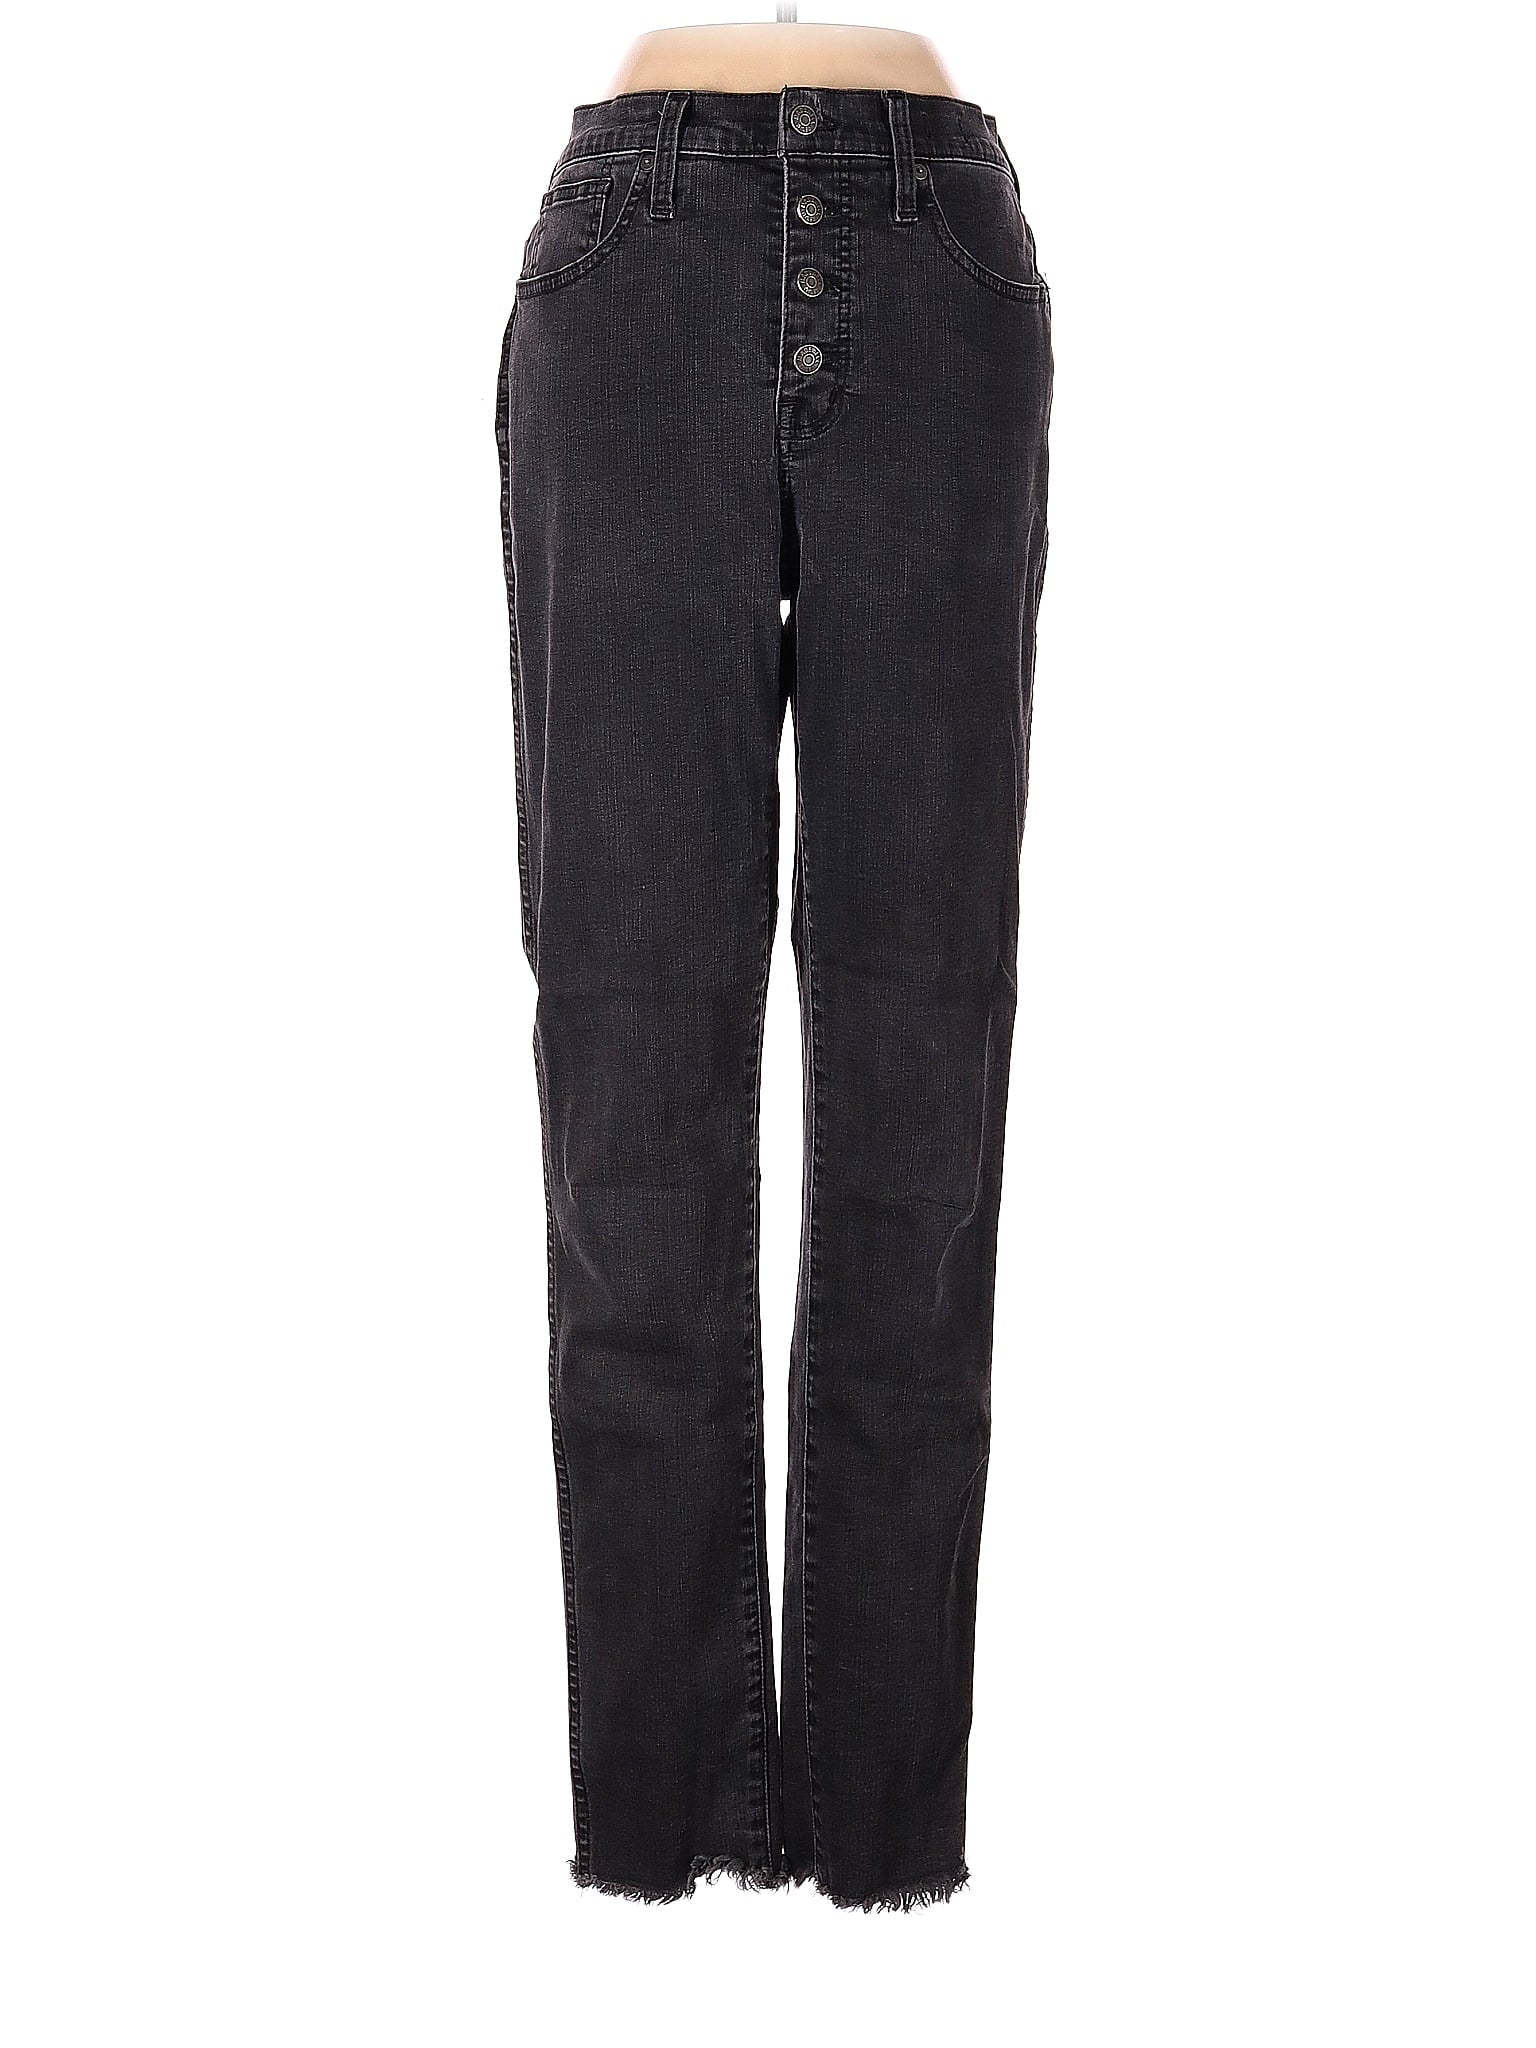 Mid-Rise Tall 10" High-Rise Skinny Jeans In Berkeley Black: Button-Through Edition waist size - 26 T